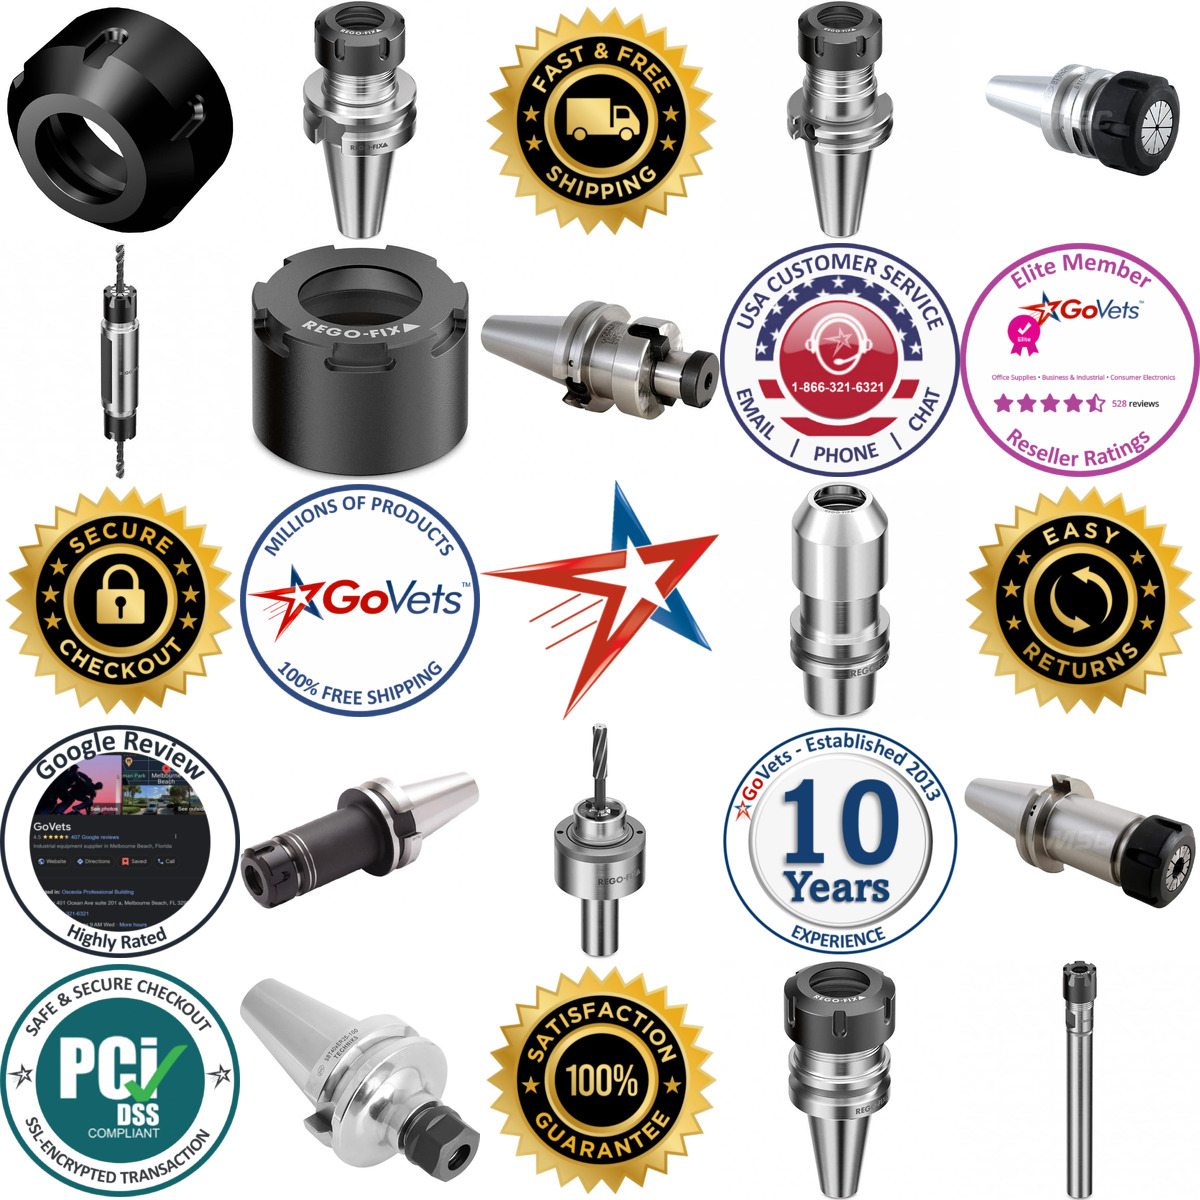 A selection of Hydraulic Chuck Sleeves products on GoVets